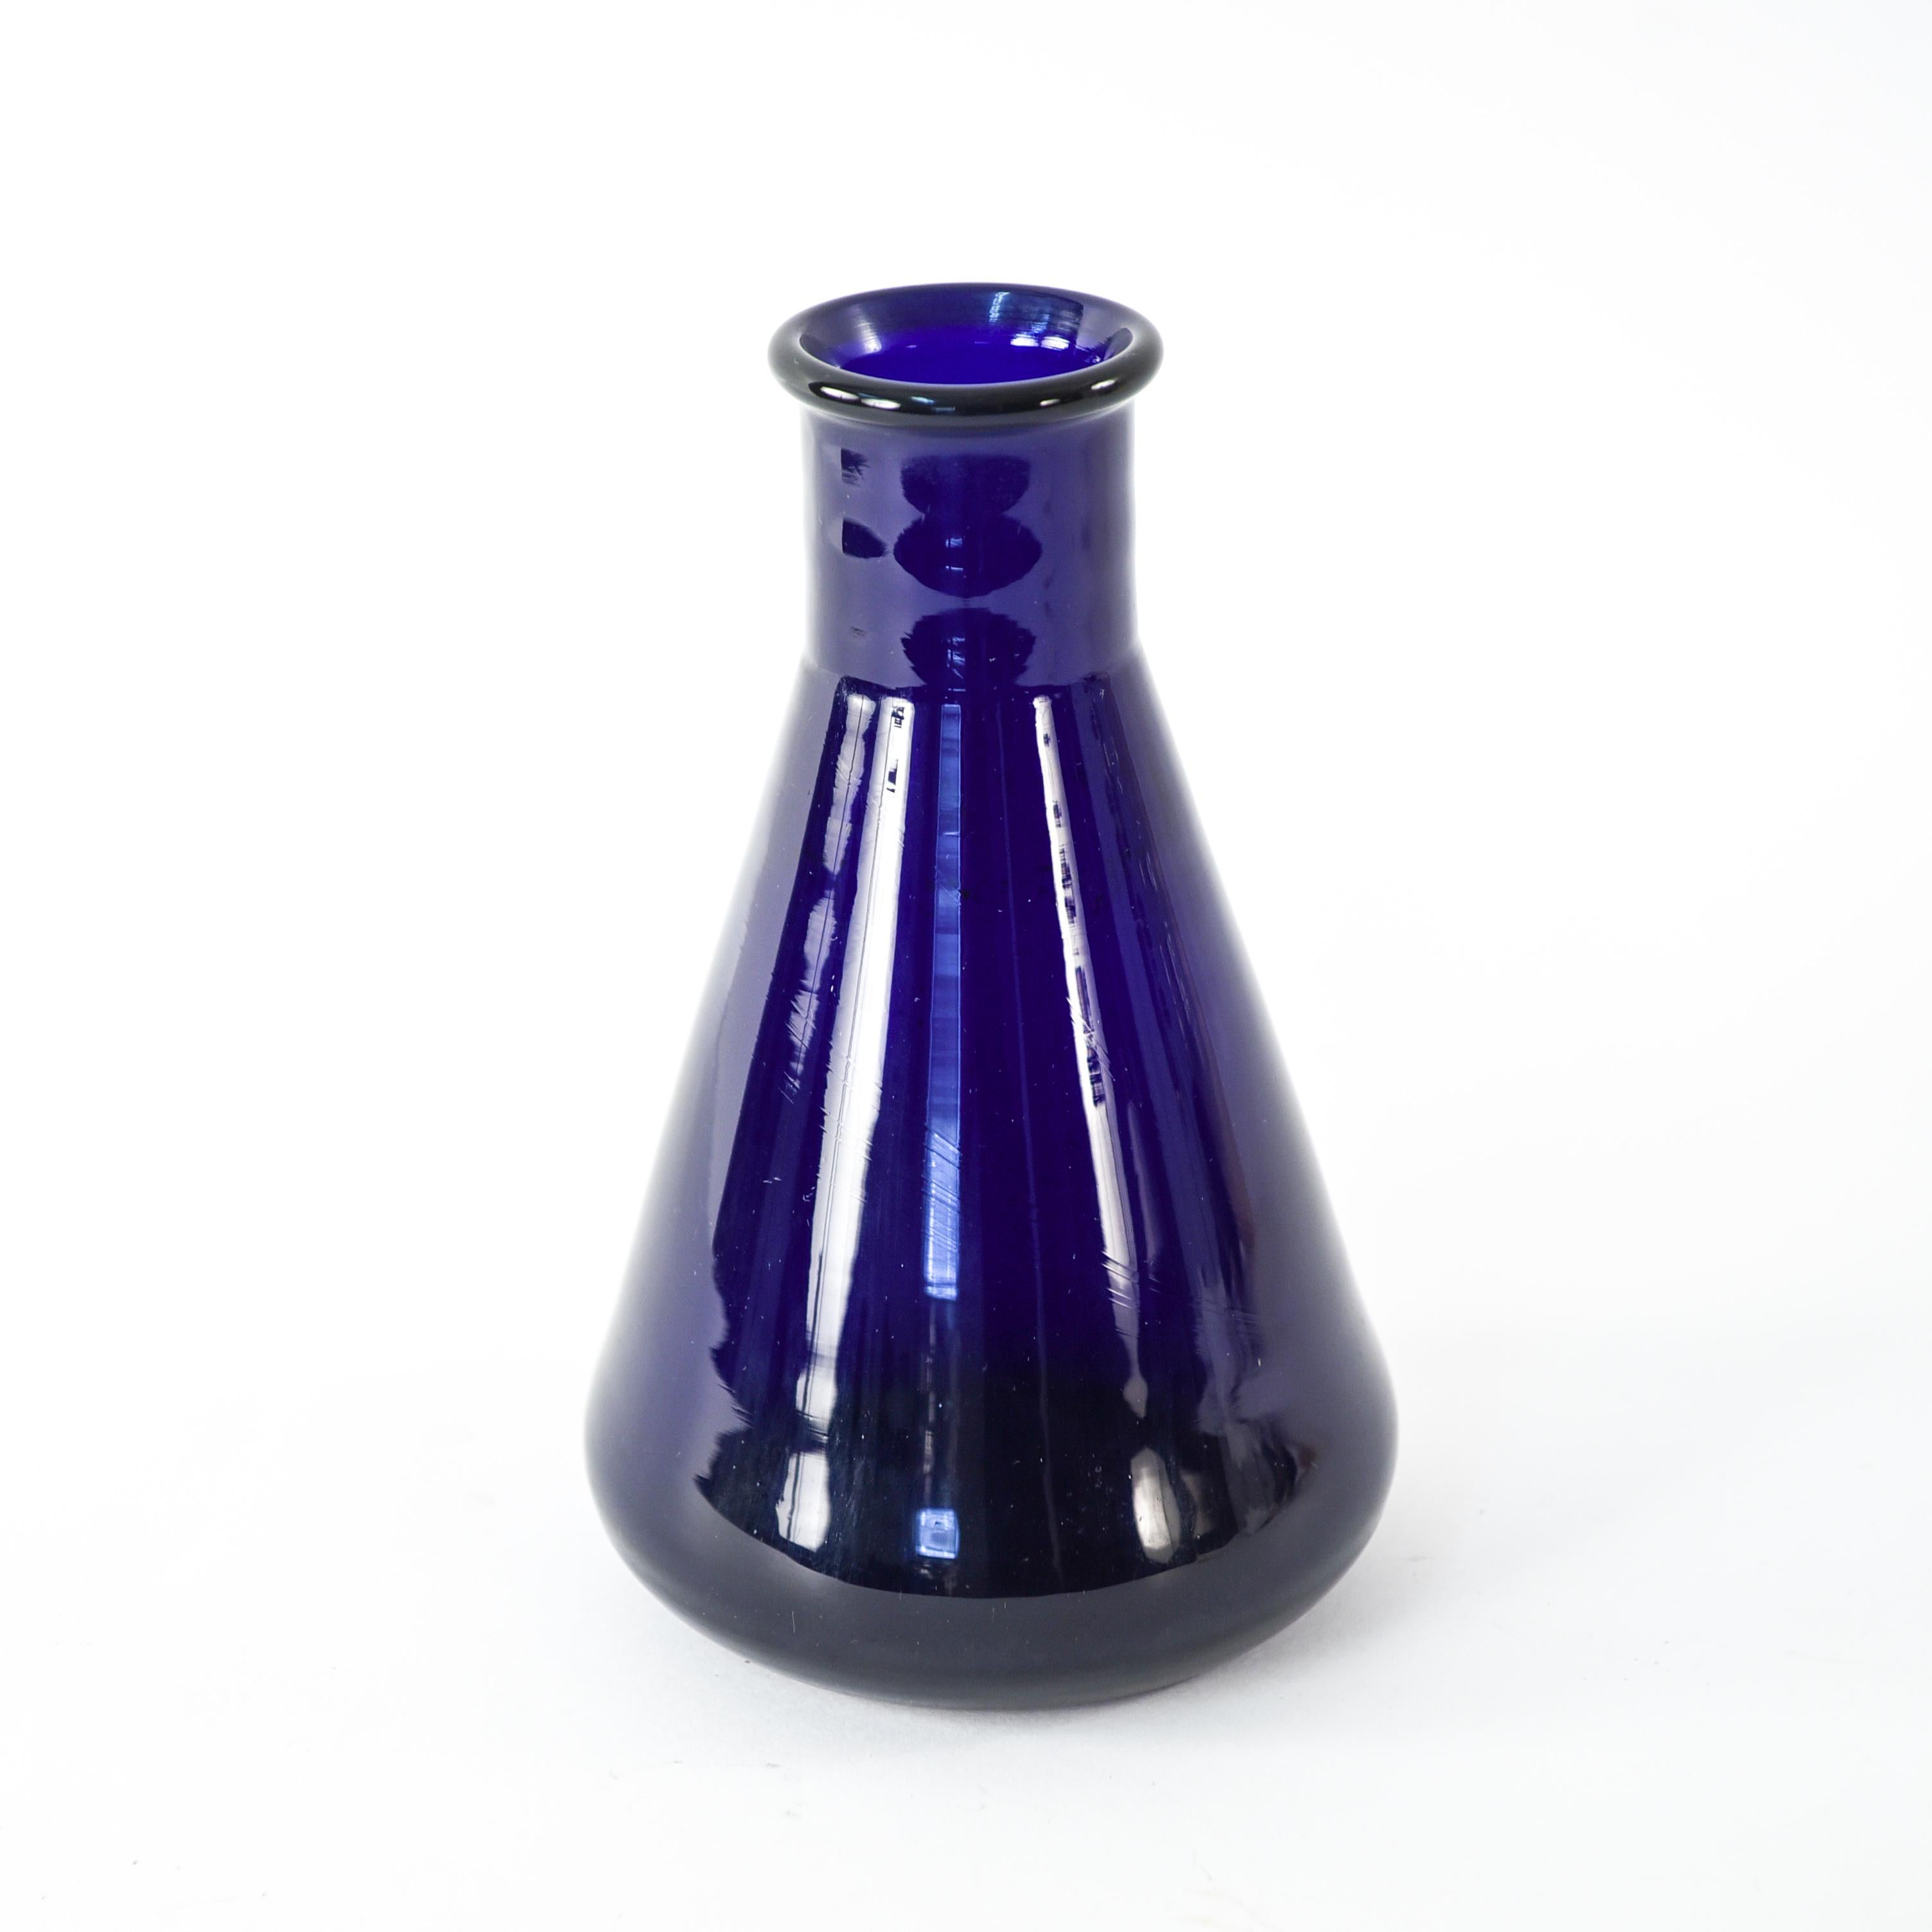 This blue glass Danish midcentury Holmegaard vase has a charming appeal to it. Its slender neck and conical base almost give it a resemblance to a scientific beaker, but the color reminds of the decorative nature. Marked underneath: Struers.